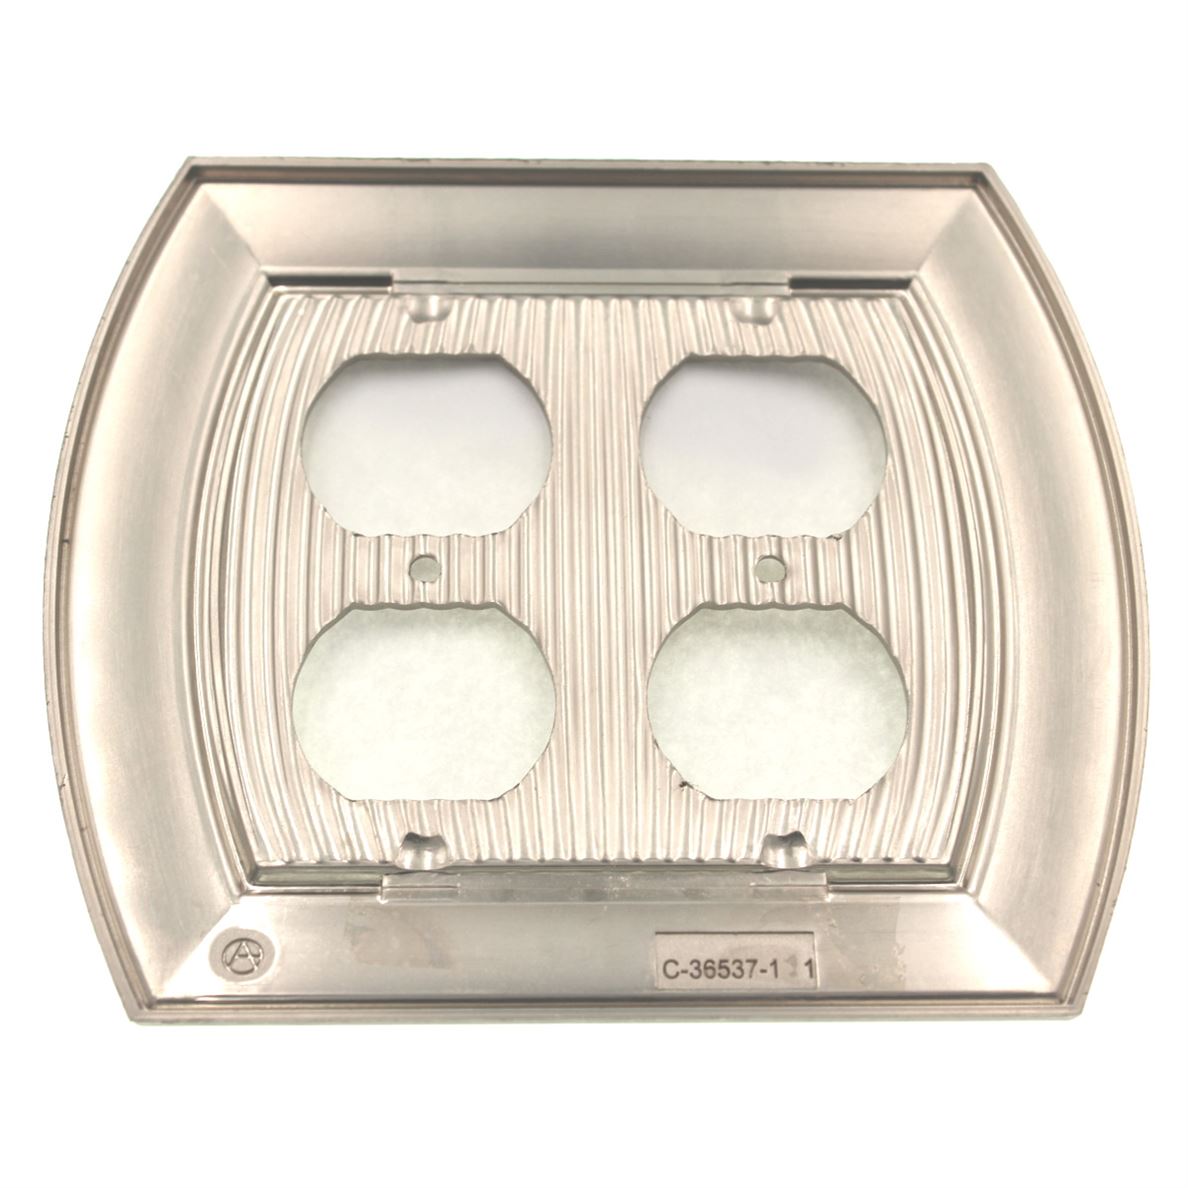 Amerock Sea Grass Satin Nickel 2 Receptacle Outlet Wall Plate BP36537G10